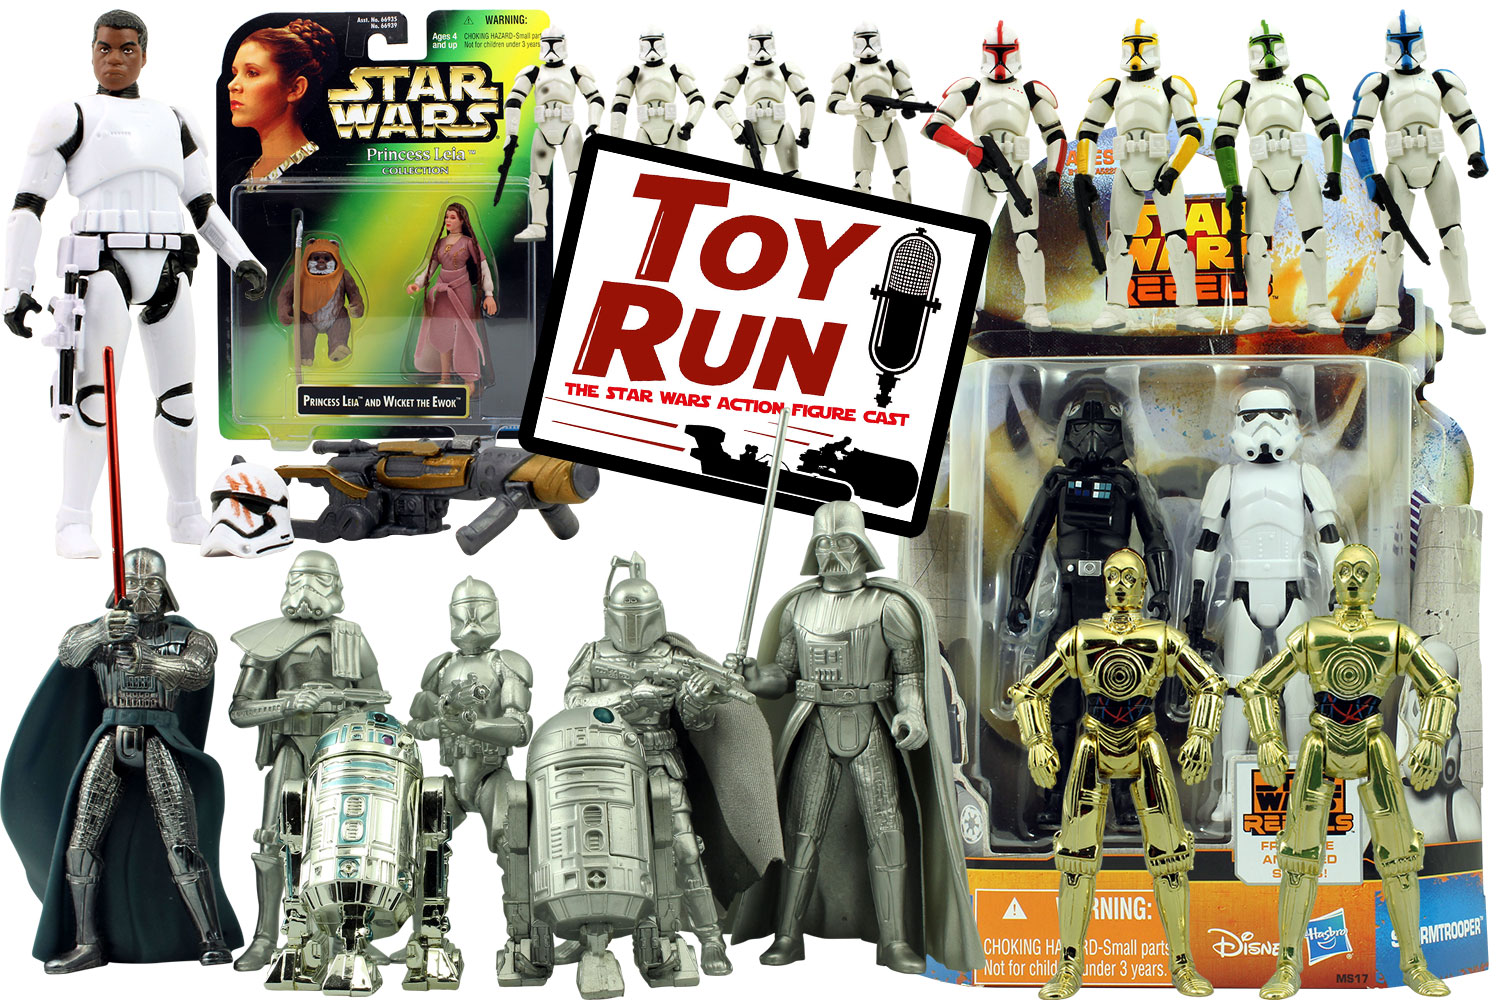 recently added Star Wars action figures